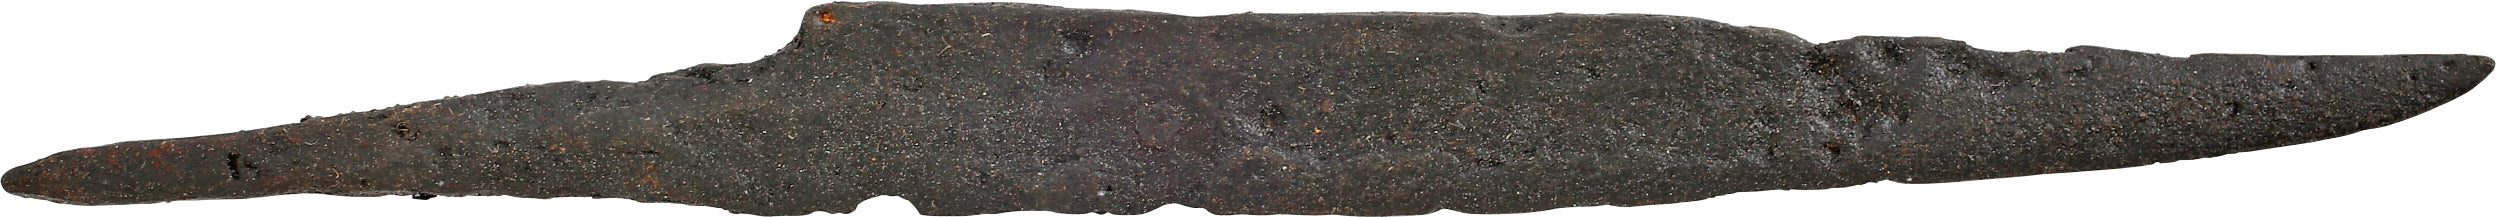 VIKING SIDE KNIFE OR POUCH KNIFE, 879-1067 AD CAMBRIDGESHIRE, ENGLAND - Fagan Arms